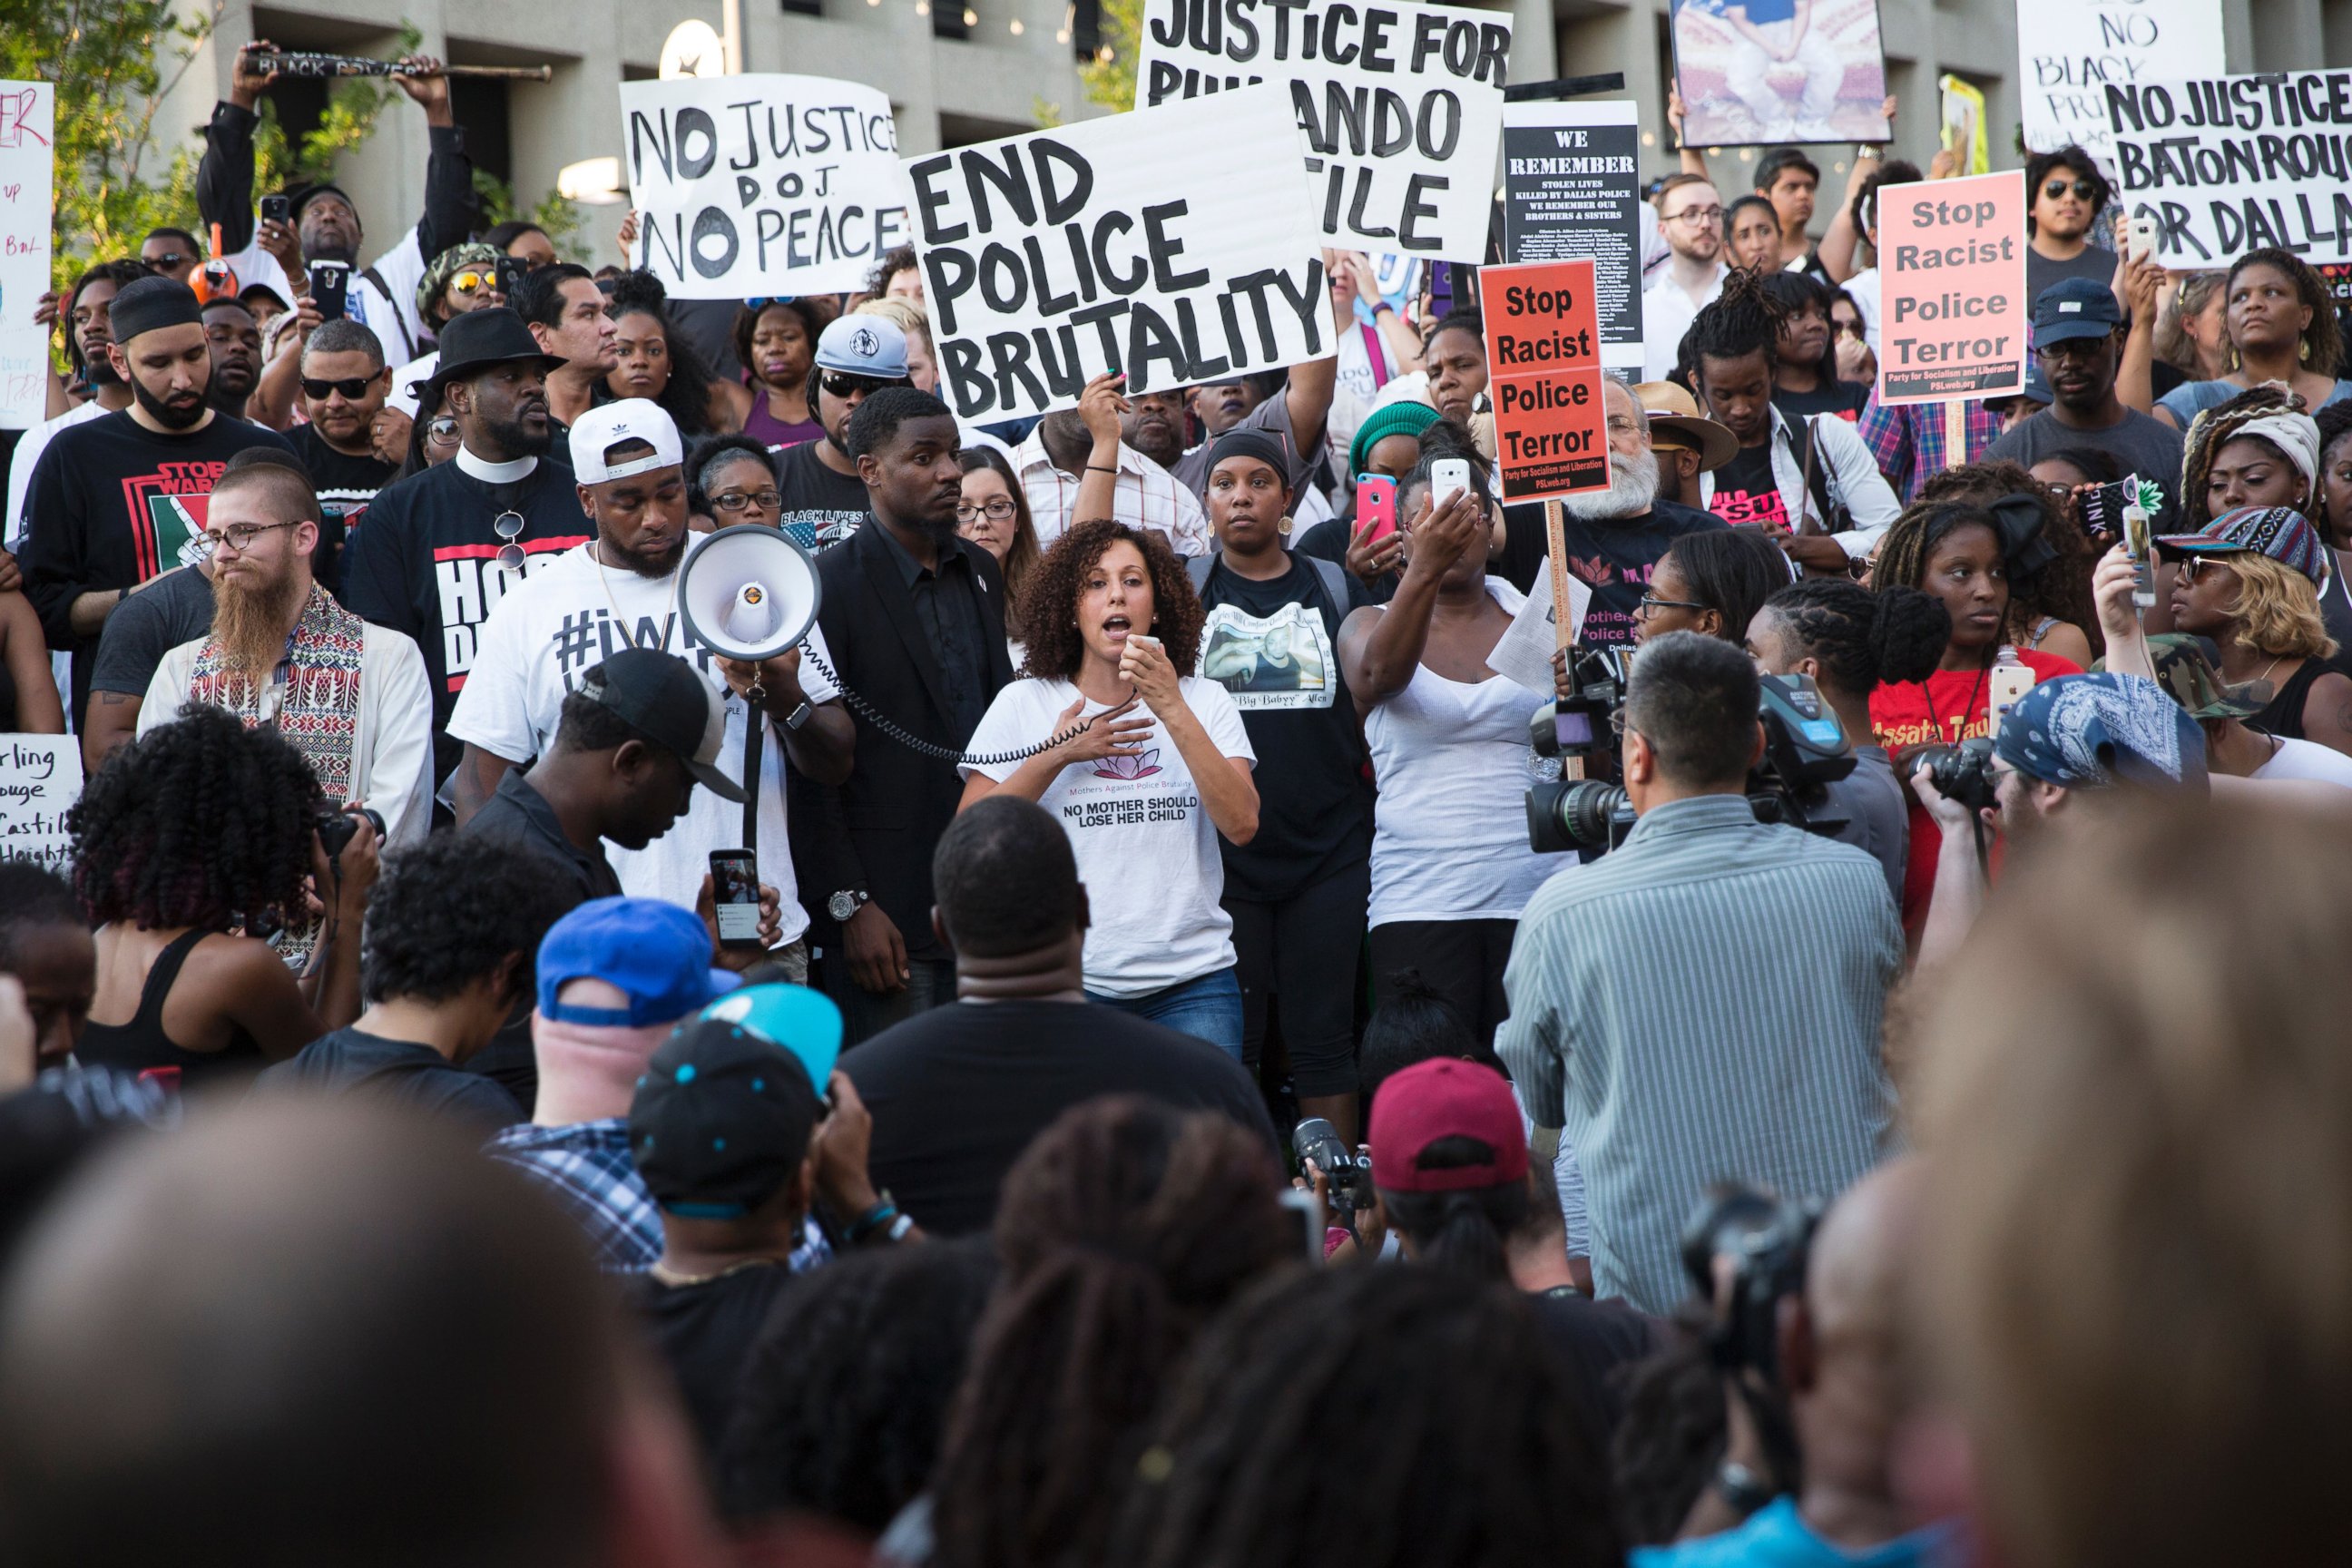 PHOTO: People rally in Dallas, Texas, July 7, 2016 to protest the deaths of Alton Sterling and Philando Castile.